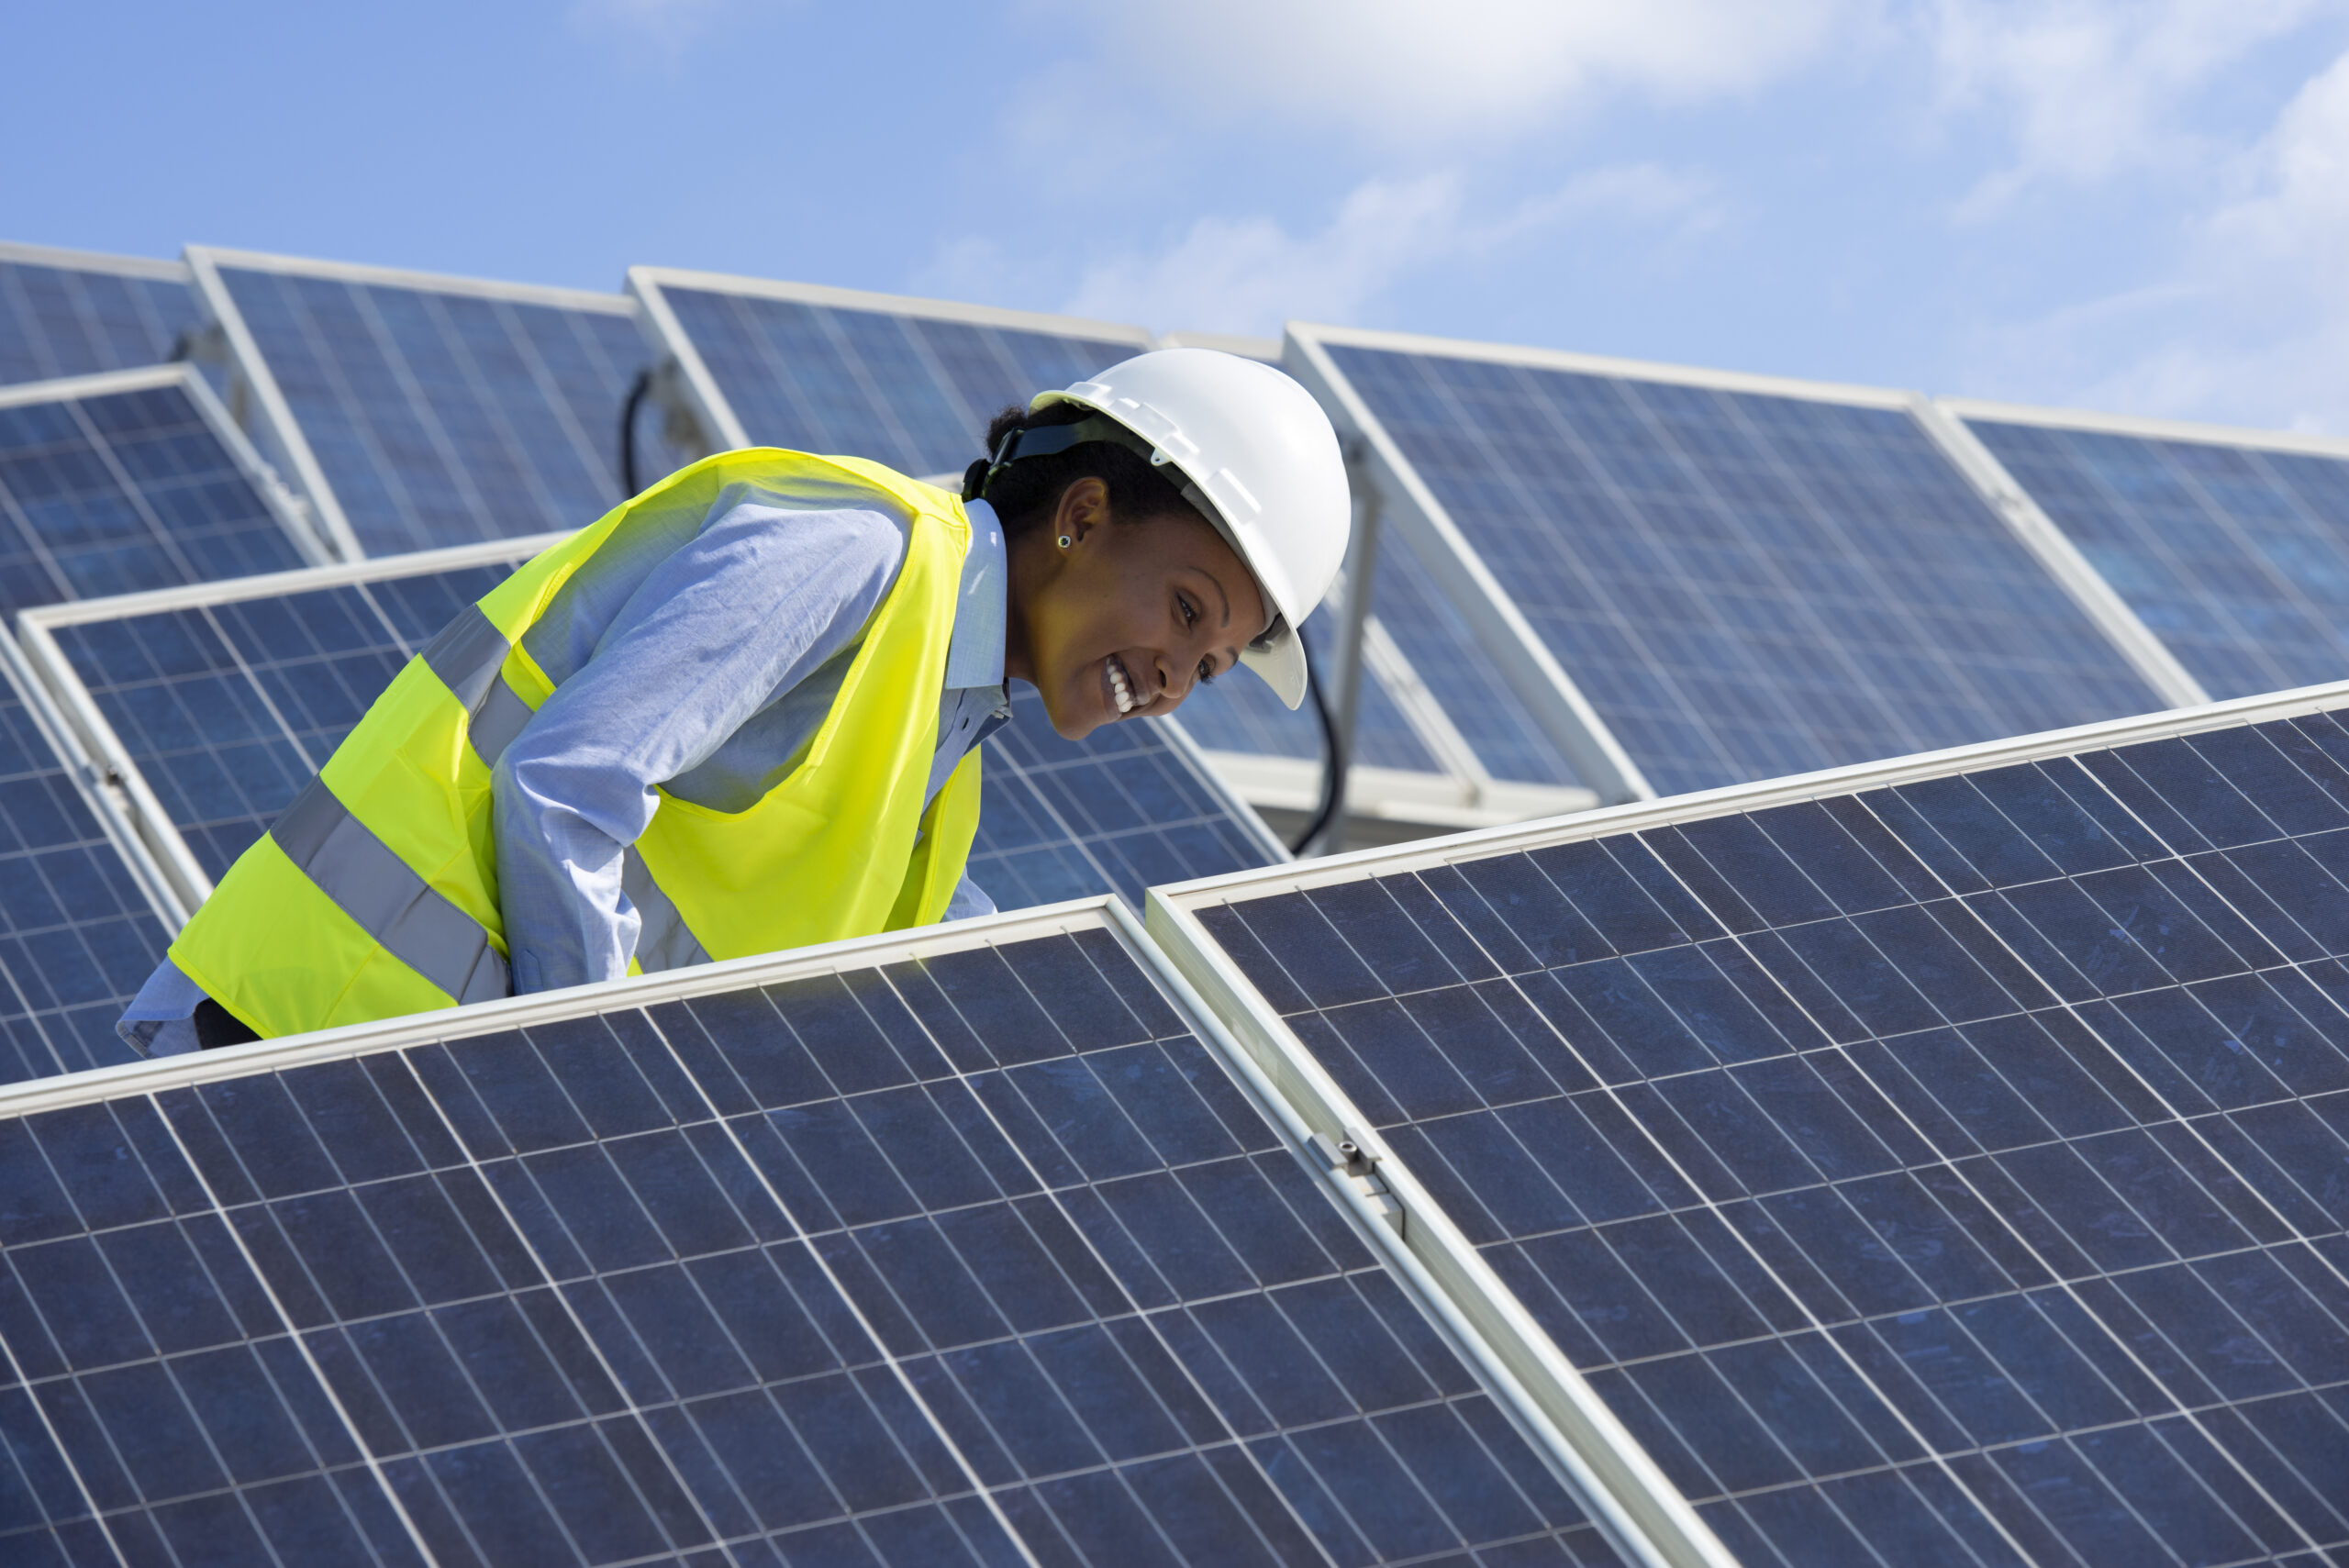 A person with a hard hat and reflective vest on is checking solar photovoltaic panels.